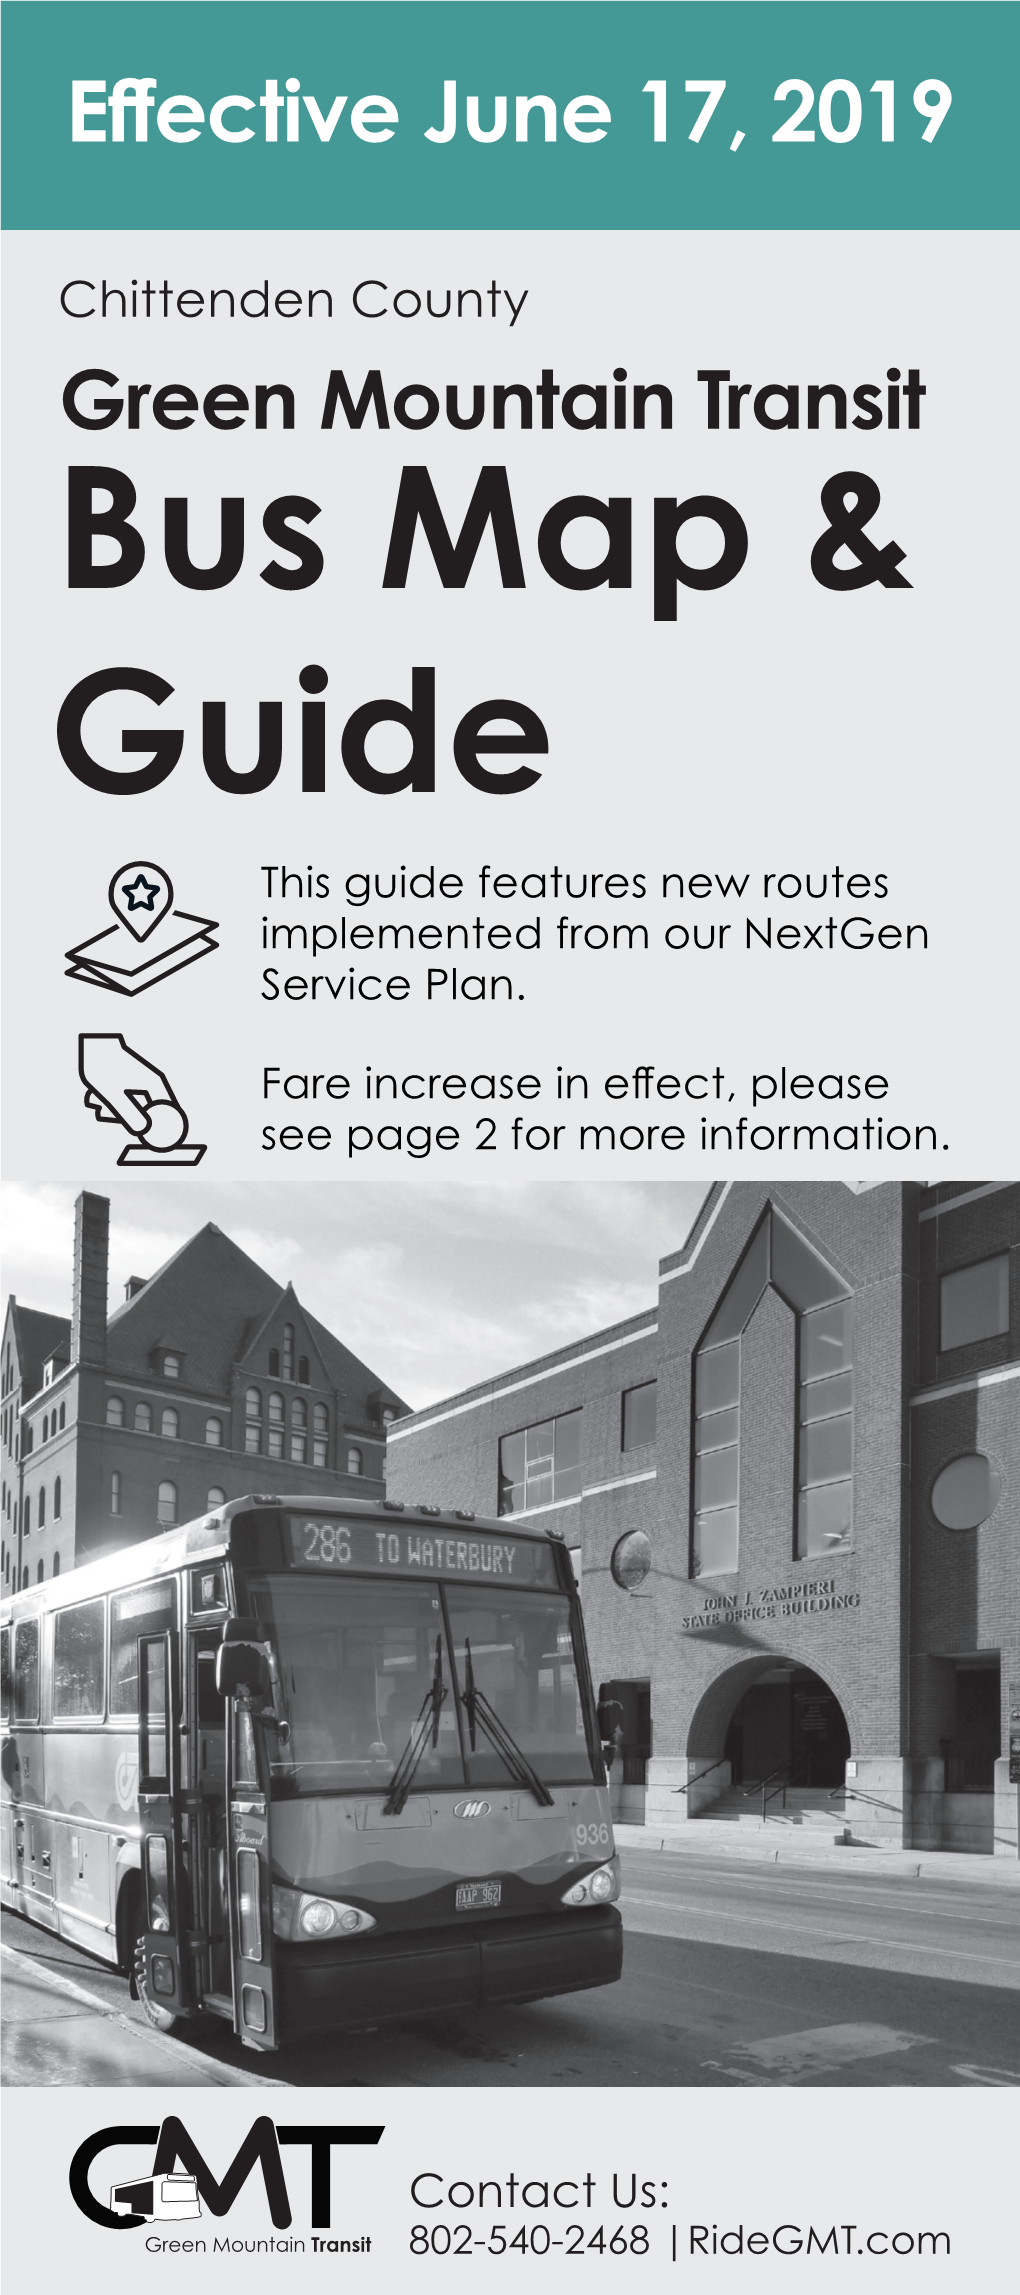 Bus Map & Guide